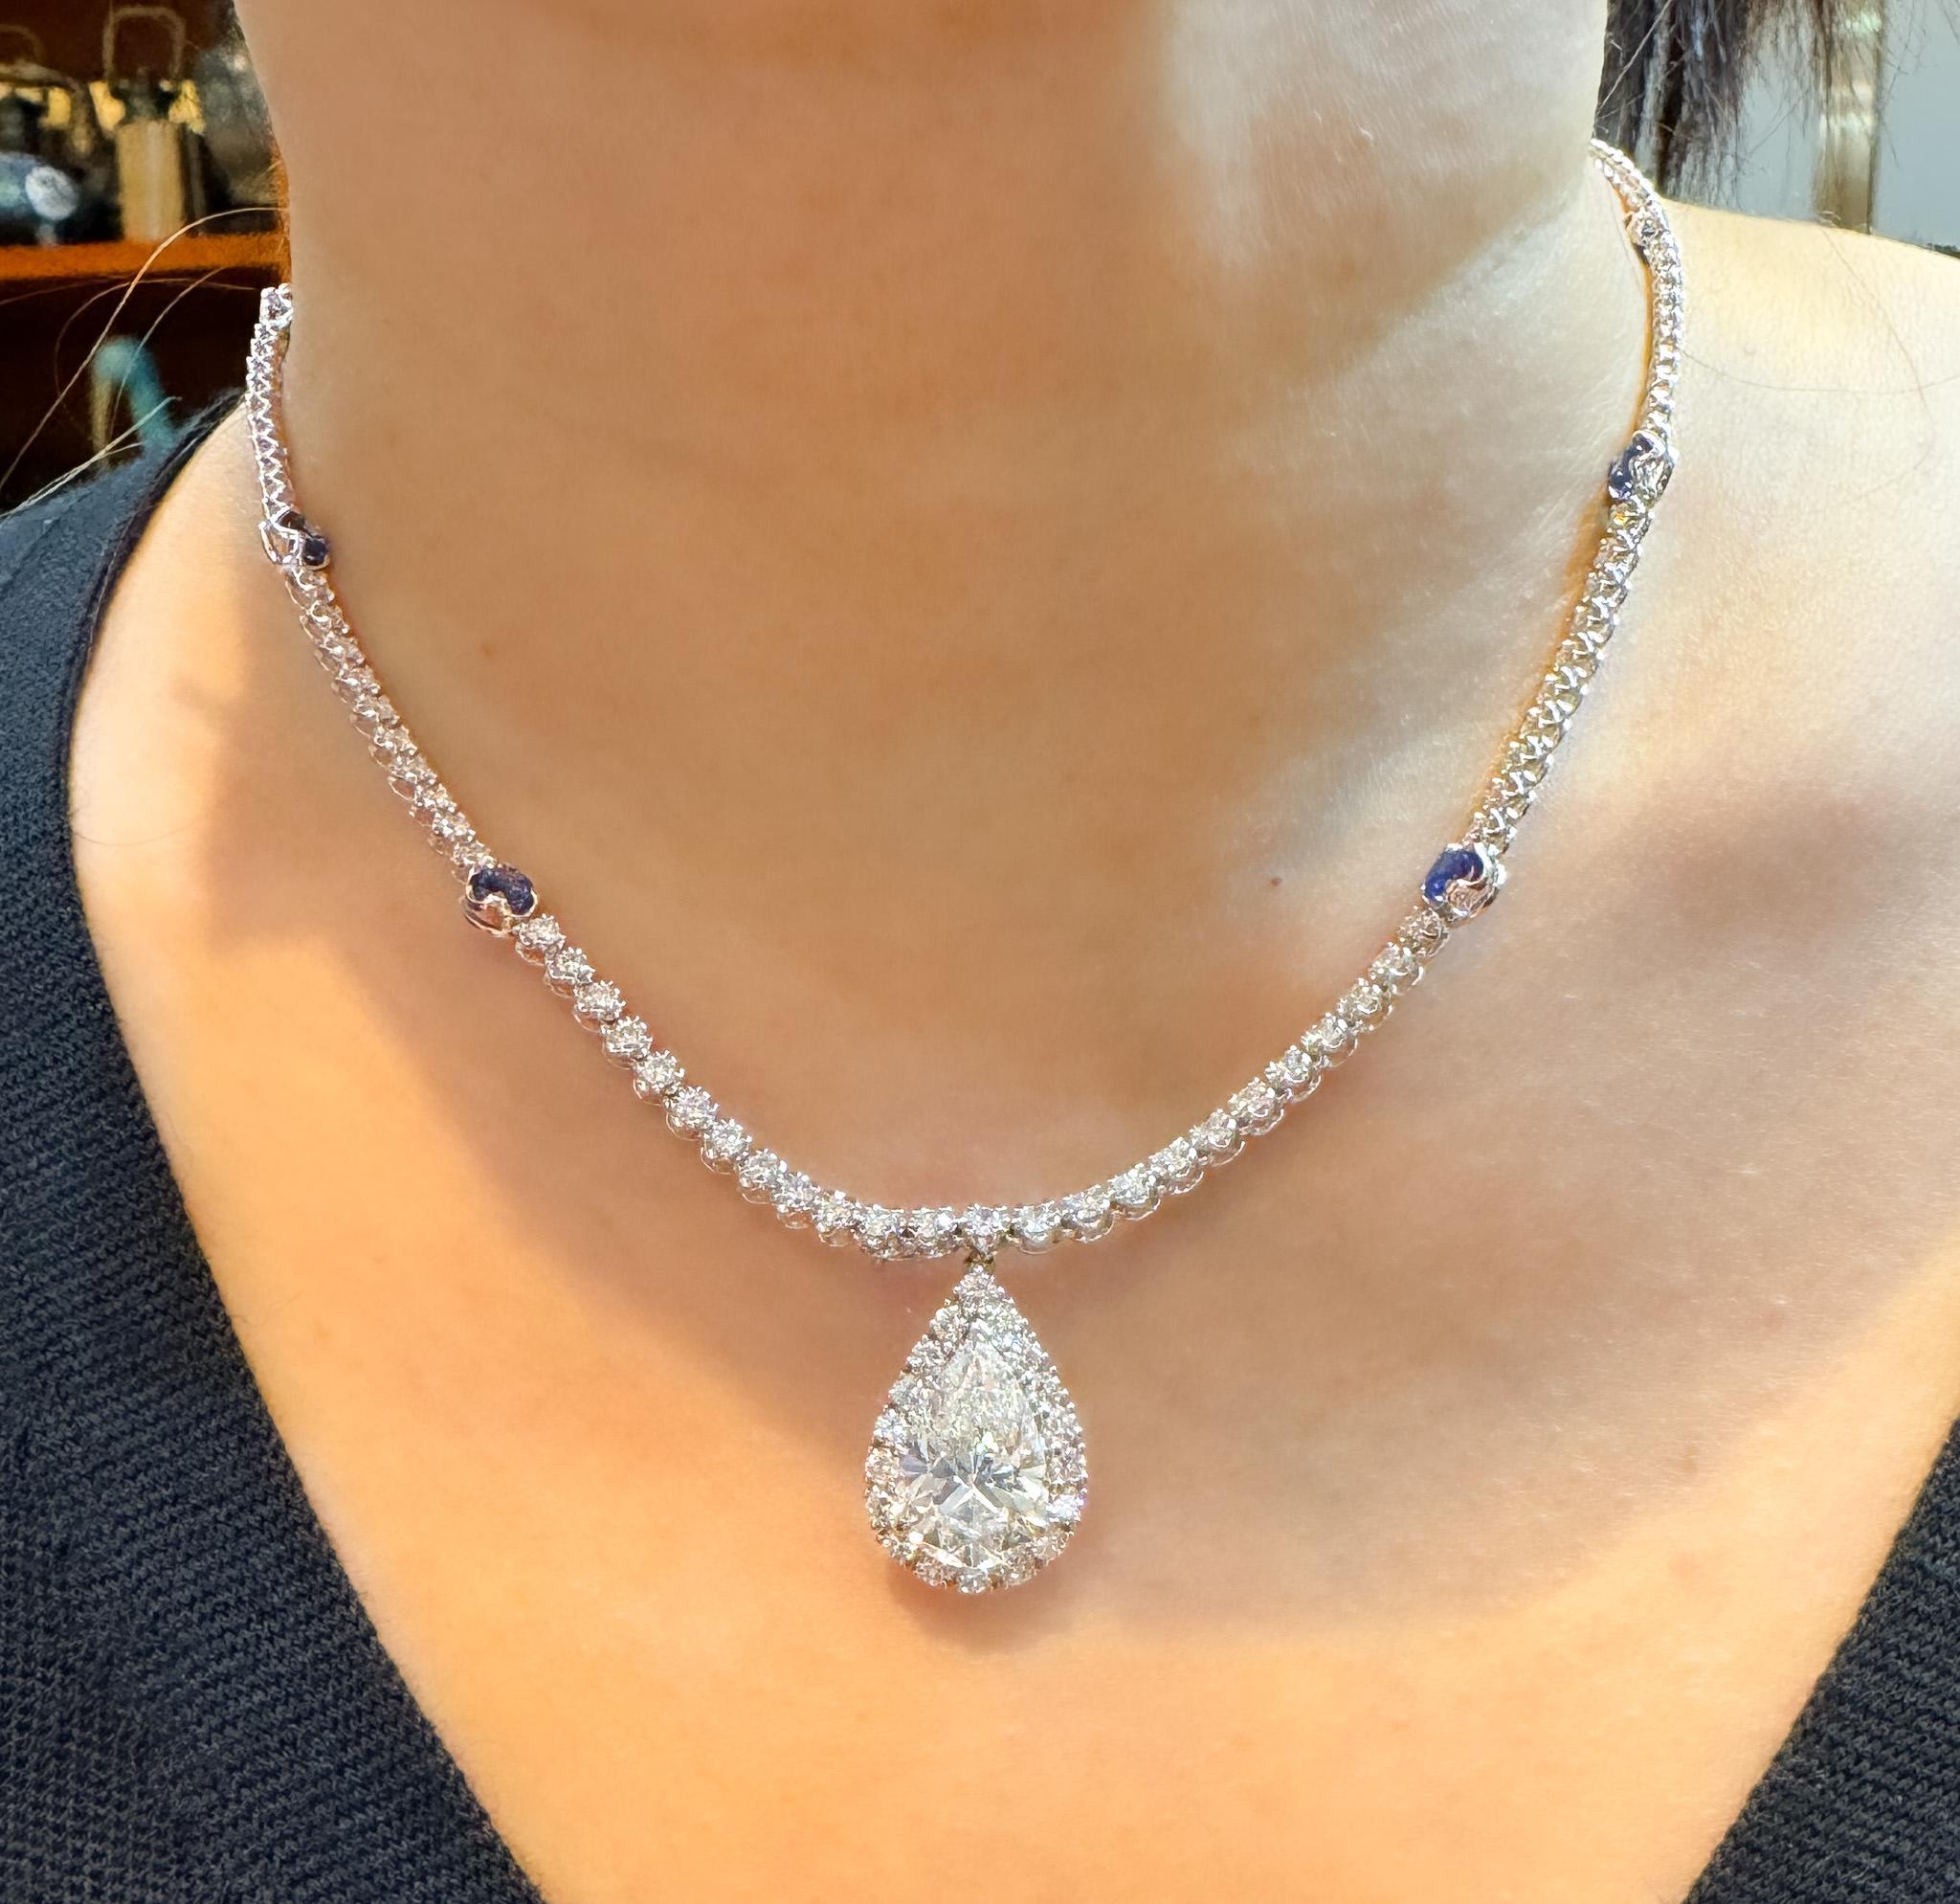 EGL Certified Pear Diamond Pendant and Diamond Halo & Sapphire Detail. 

Pendant necklace featuring a EGL-certified pear-shaped 5.02-carat natural white diamond center stone with SI2 clarity and G color. Surrounded by 18 round-cut diamond halo